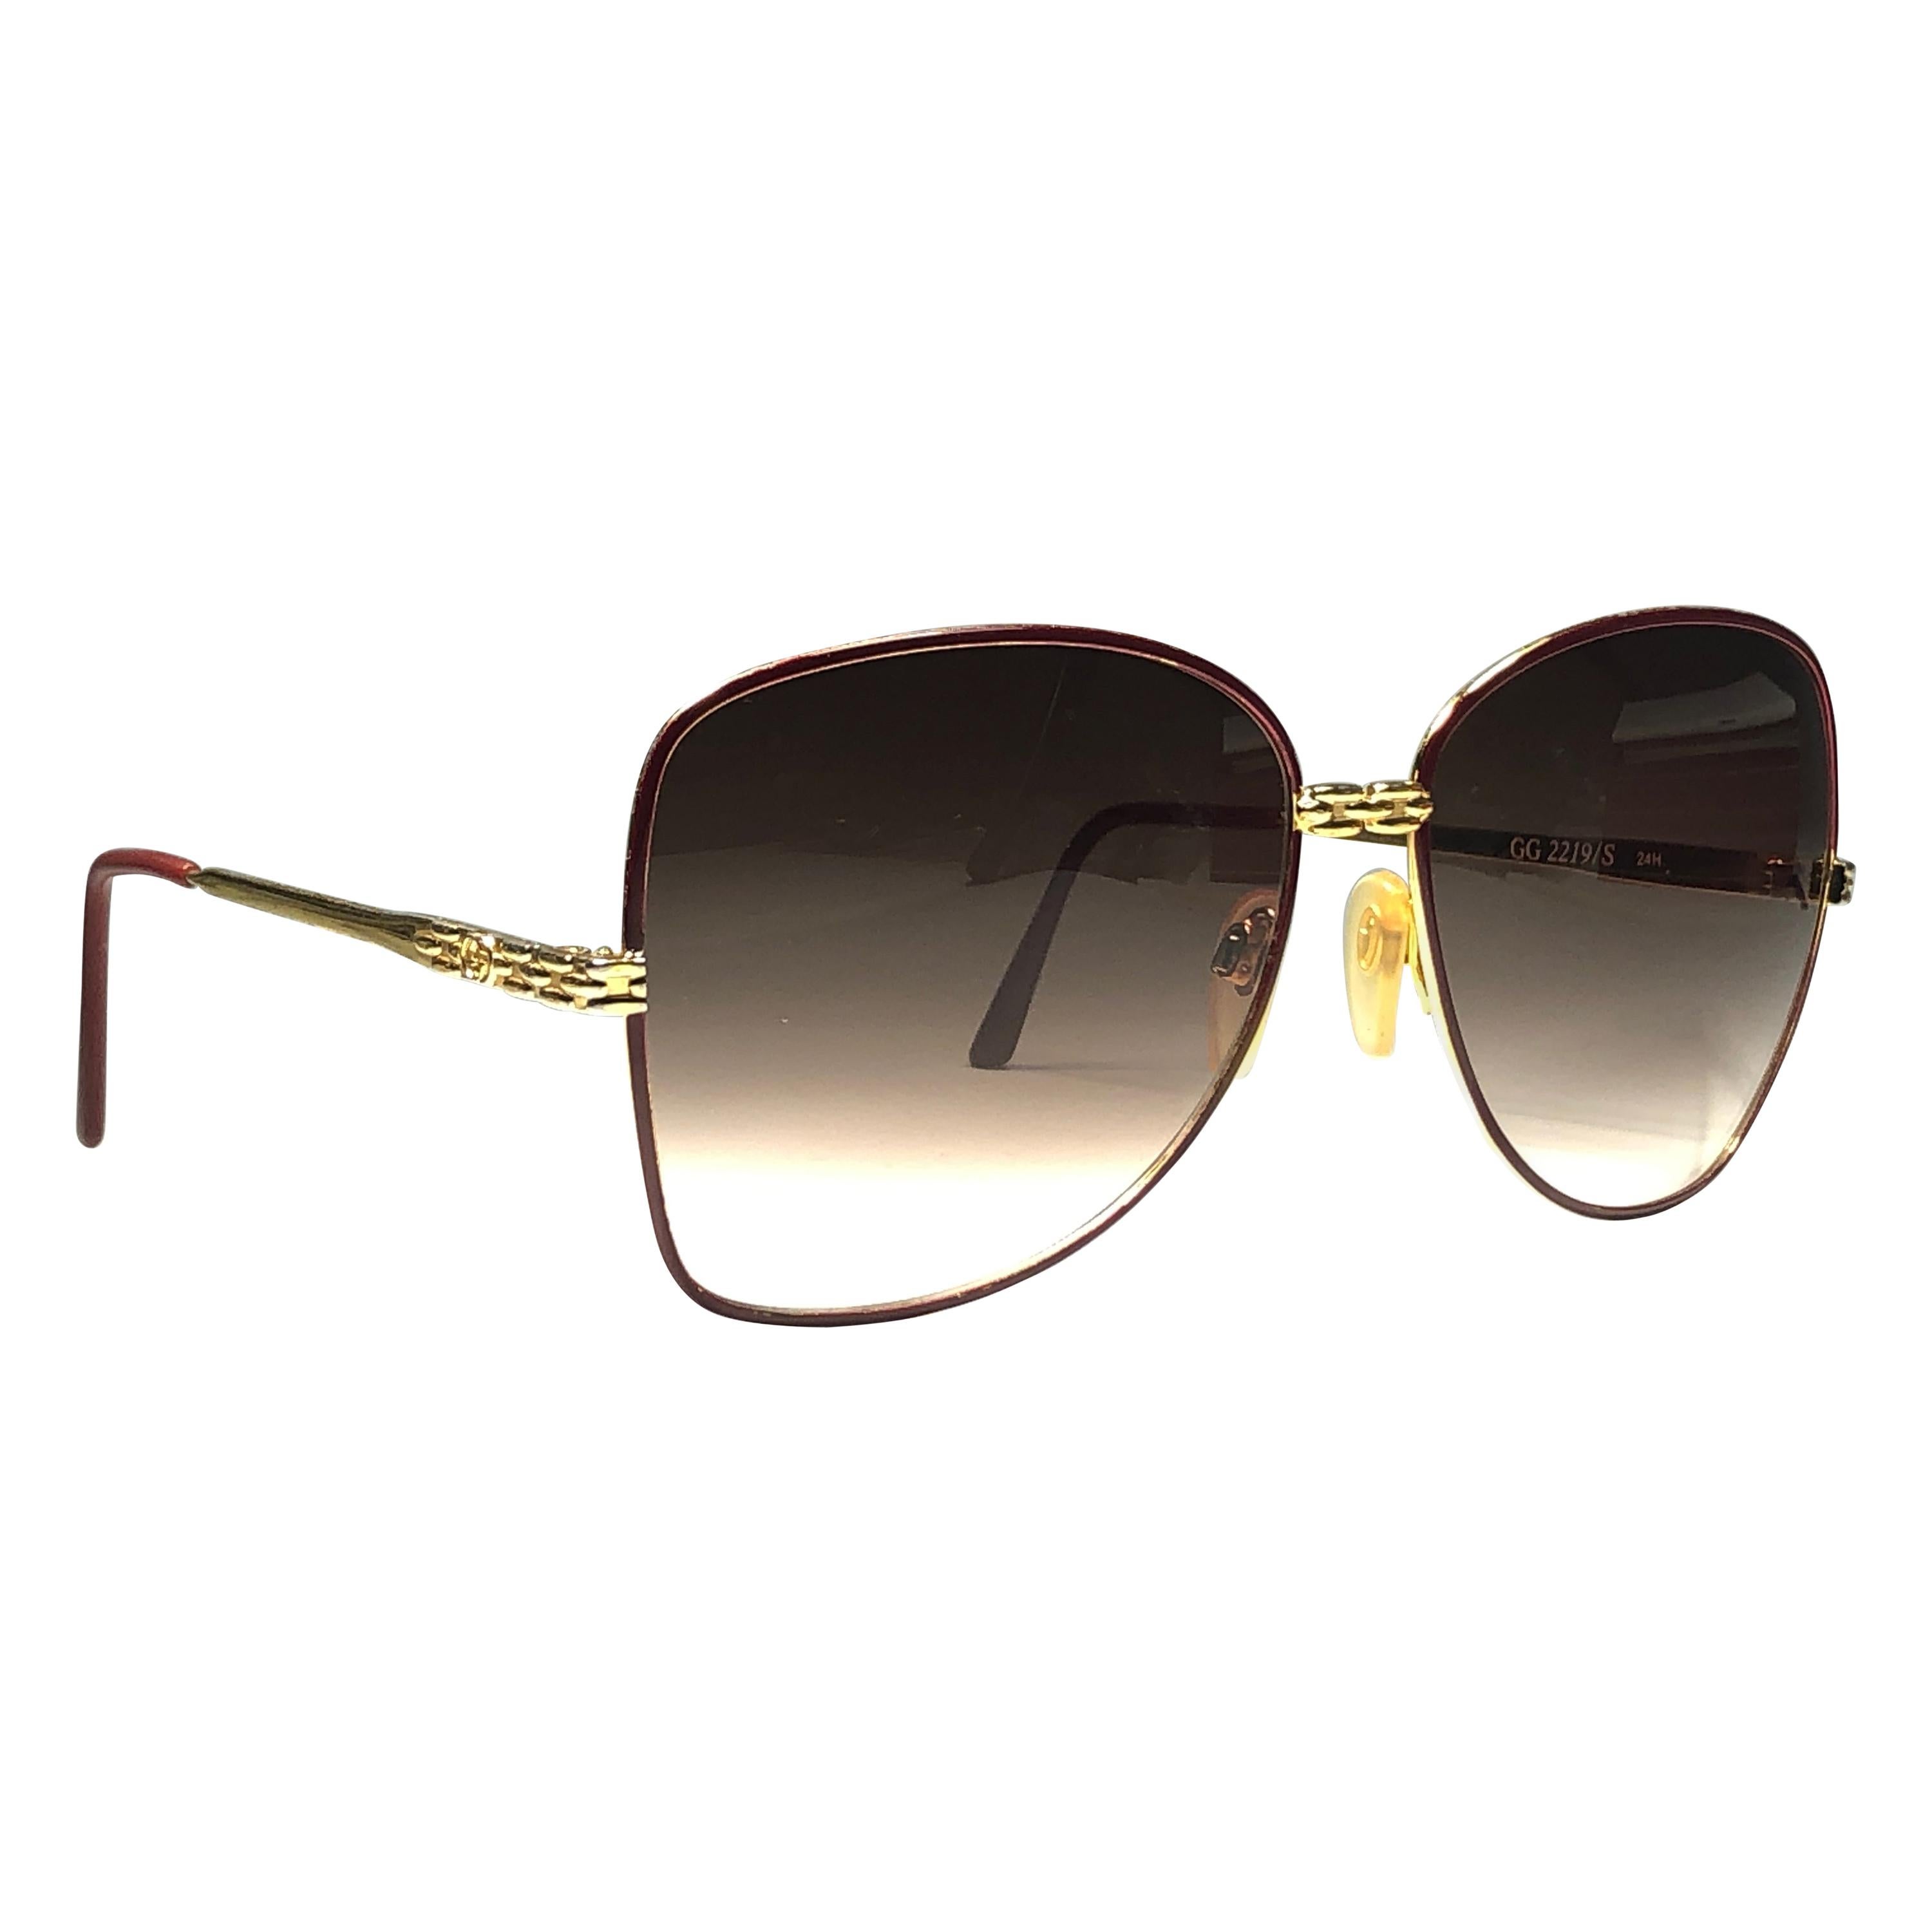 Mint Vintage Gucci 2219 Sunglasses Burgundy & Gold 1990's Made in Italy